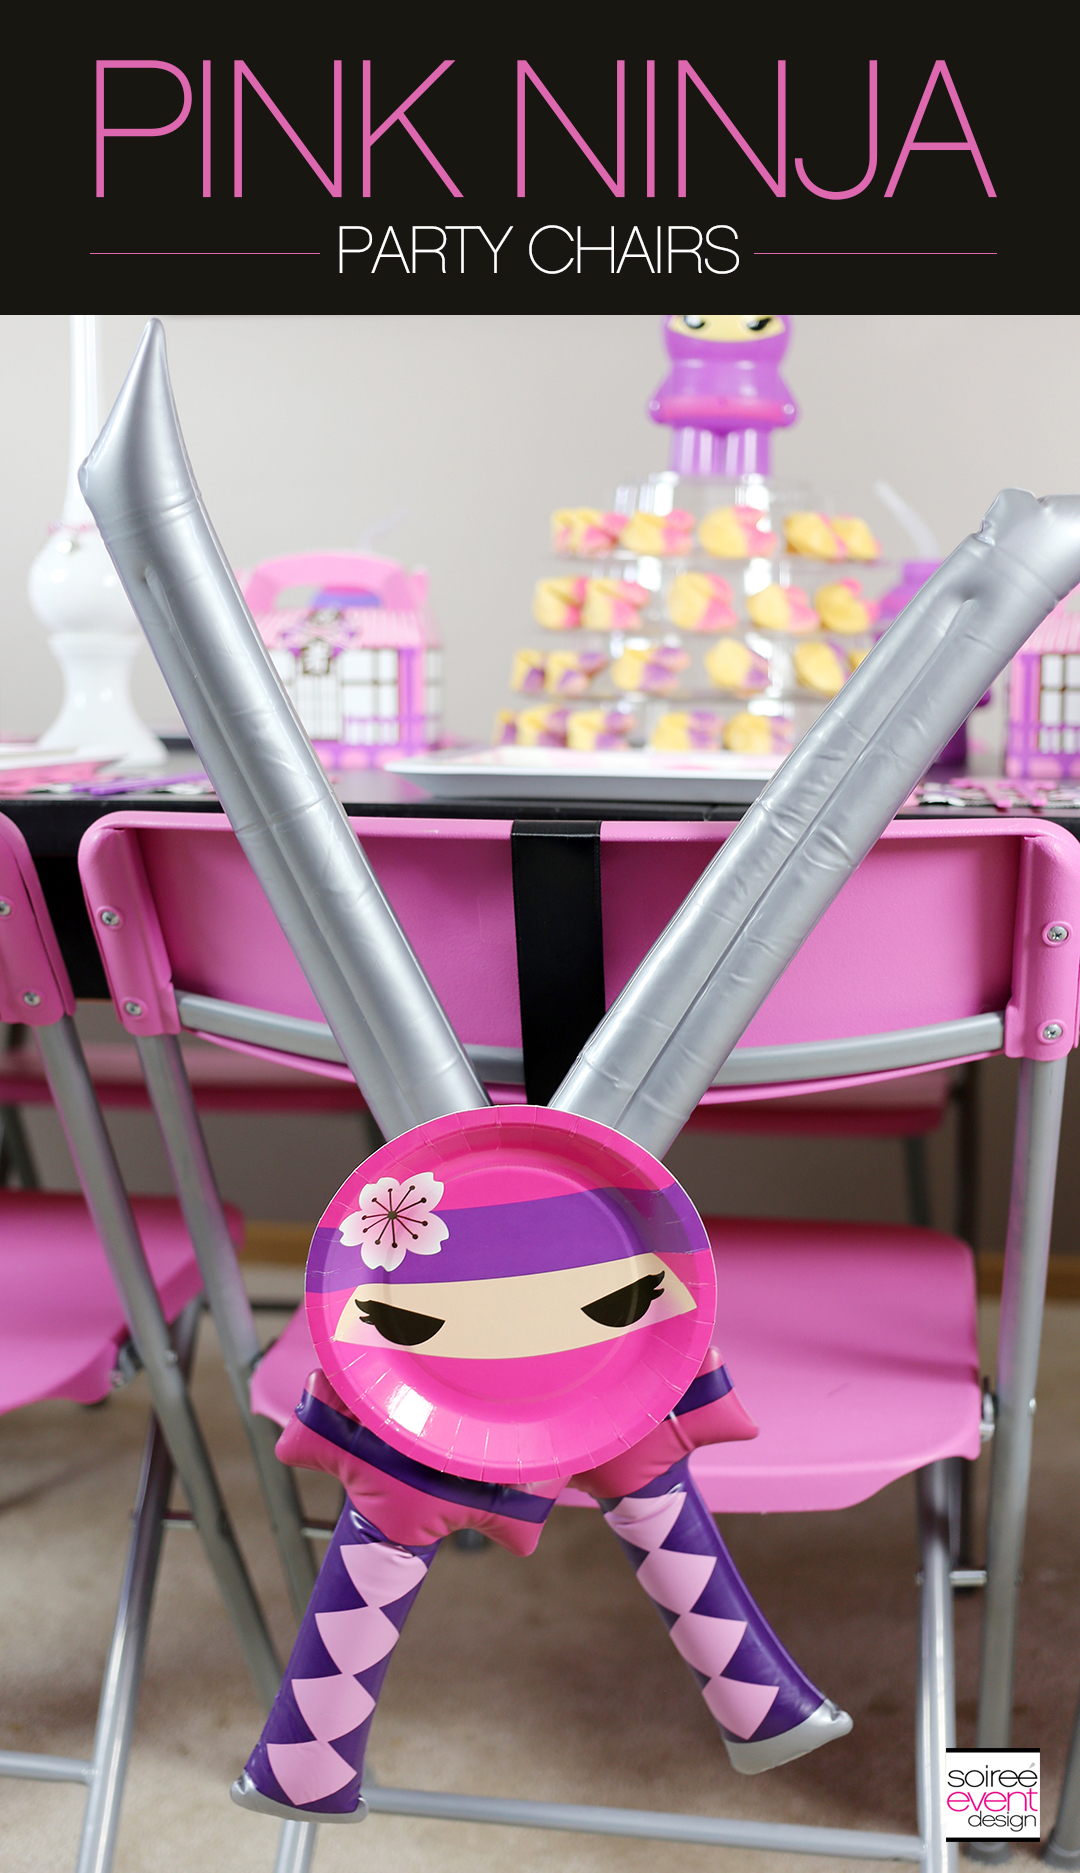 Pink Ninja Party Chairs